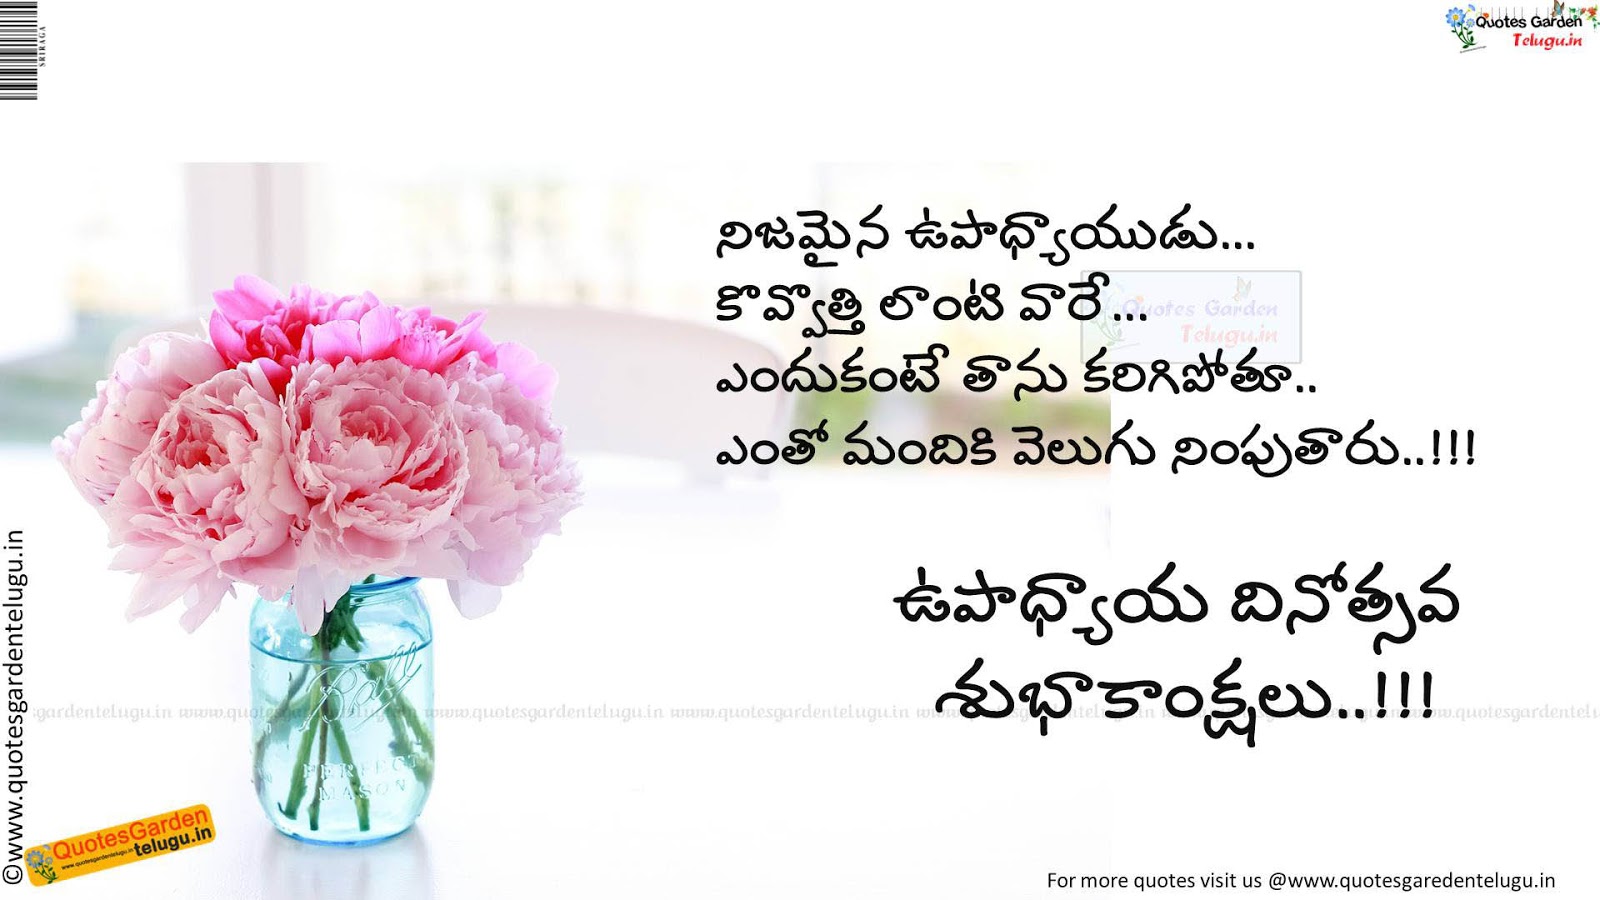 Teachersday quotes Greetings HDwallpapers wishes poems messages sms  whatsapp in telugu | QUOTES GARDEN TELUGU | Telugu Quotes | English Quotes  | Hindi Quotes |